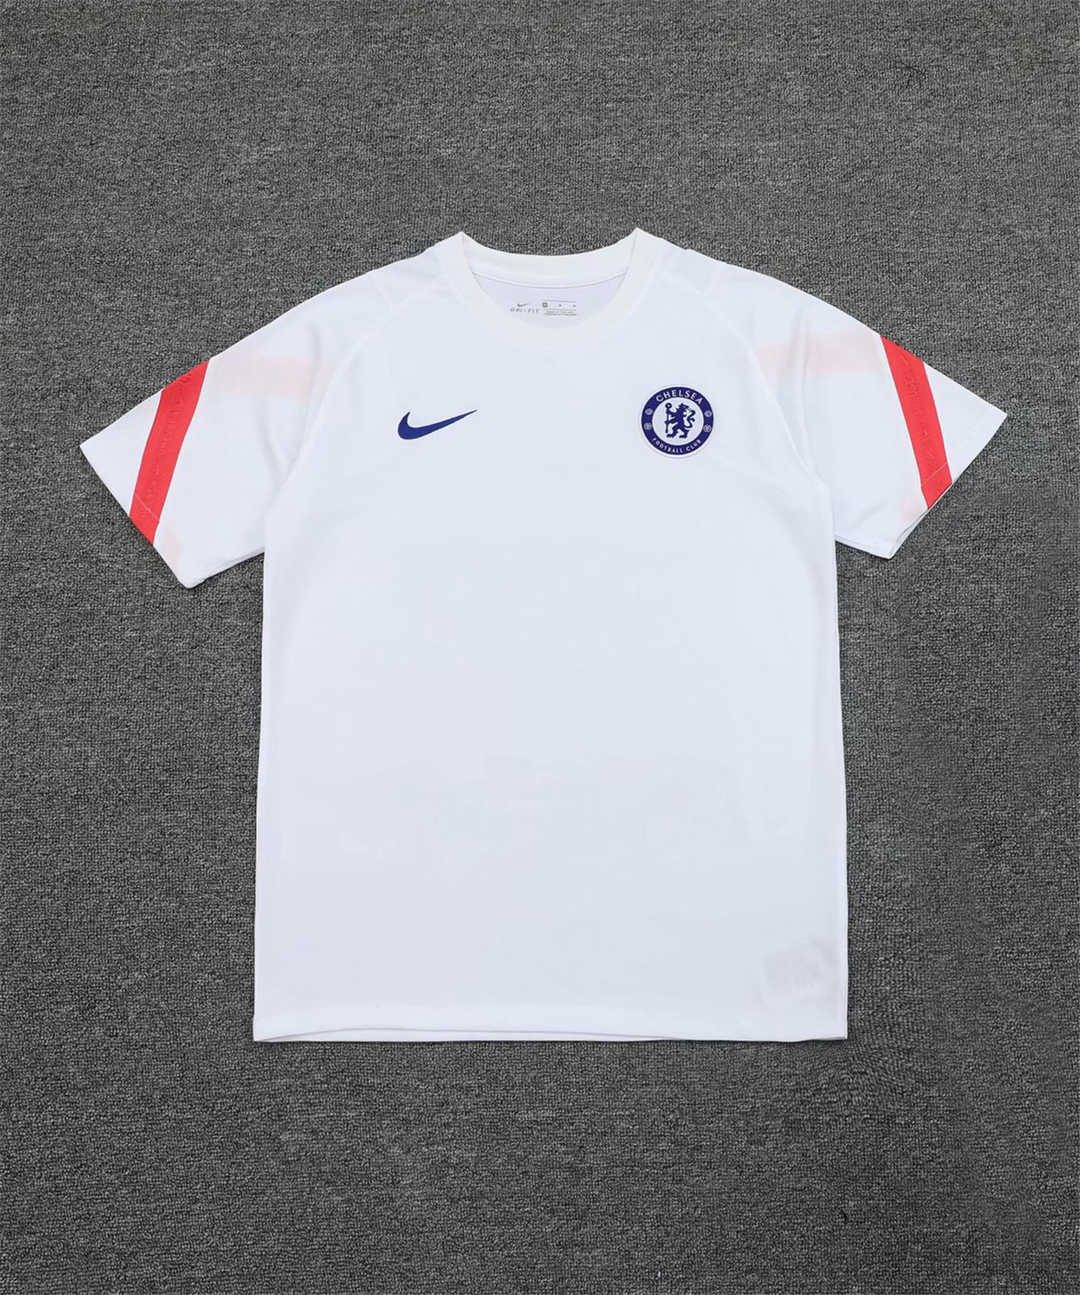 2020/21 Chelsea UCL White Mens Soccer Traning Jersey